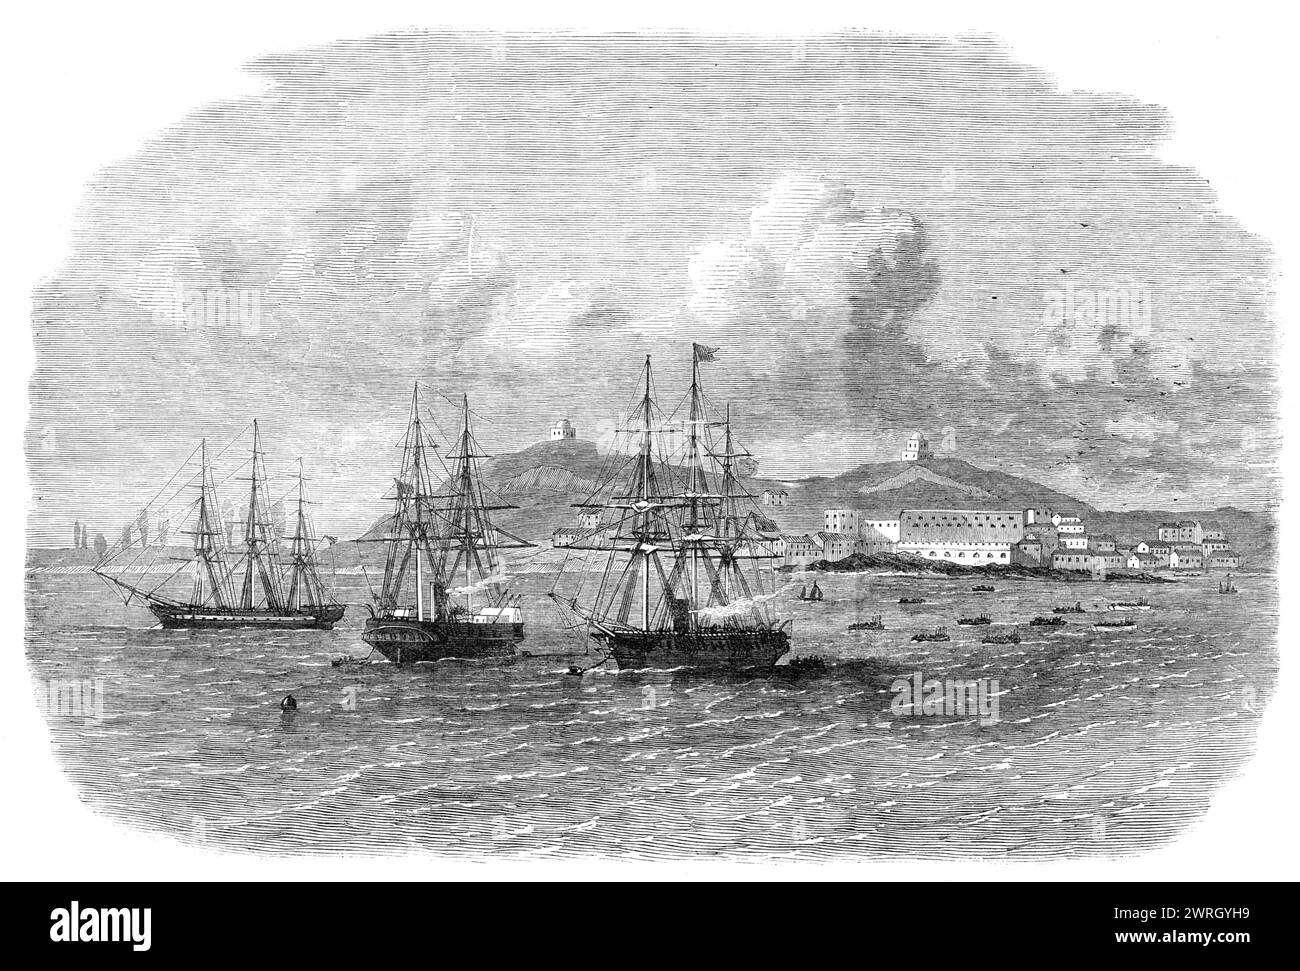 Embarkation at Cape Coast Castle of the troops recalled from the Ashantee War, 1864. Engraving from a sketch by Dr. Eames of H.M.S. Gladiator, showing '...the harbour or roads of Cape Coast Castle...The transport-vessel which awaits the boats, in readiness to convey the soldiery from this unhealthy station, is escorted by the Gladiator and Rattlesnake ships of war. The town consists, except a few European houses, of straggling lines of mud huts, with clusters of palm-trees and tamarind-trees; but the fortress, which is large and well-built, standing on a rock close to the sea, is the most cons Stock Photo